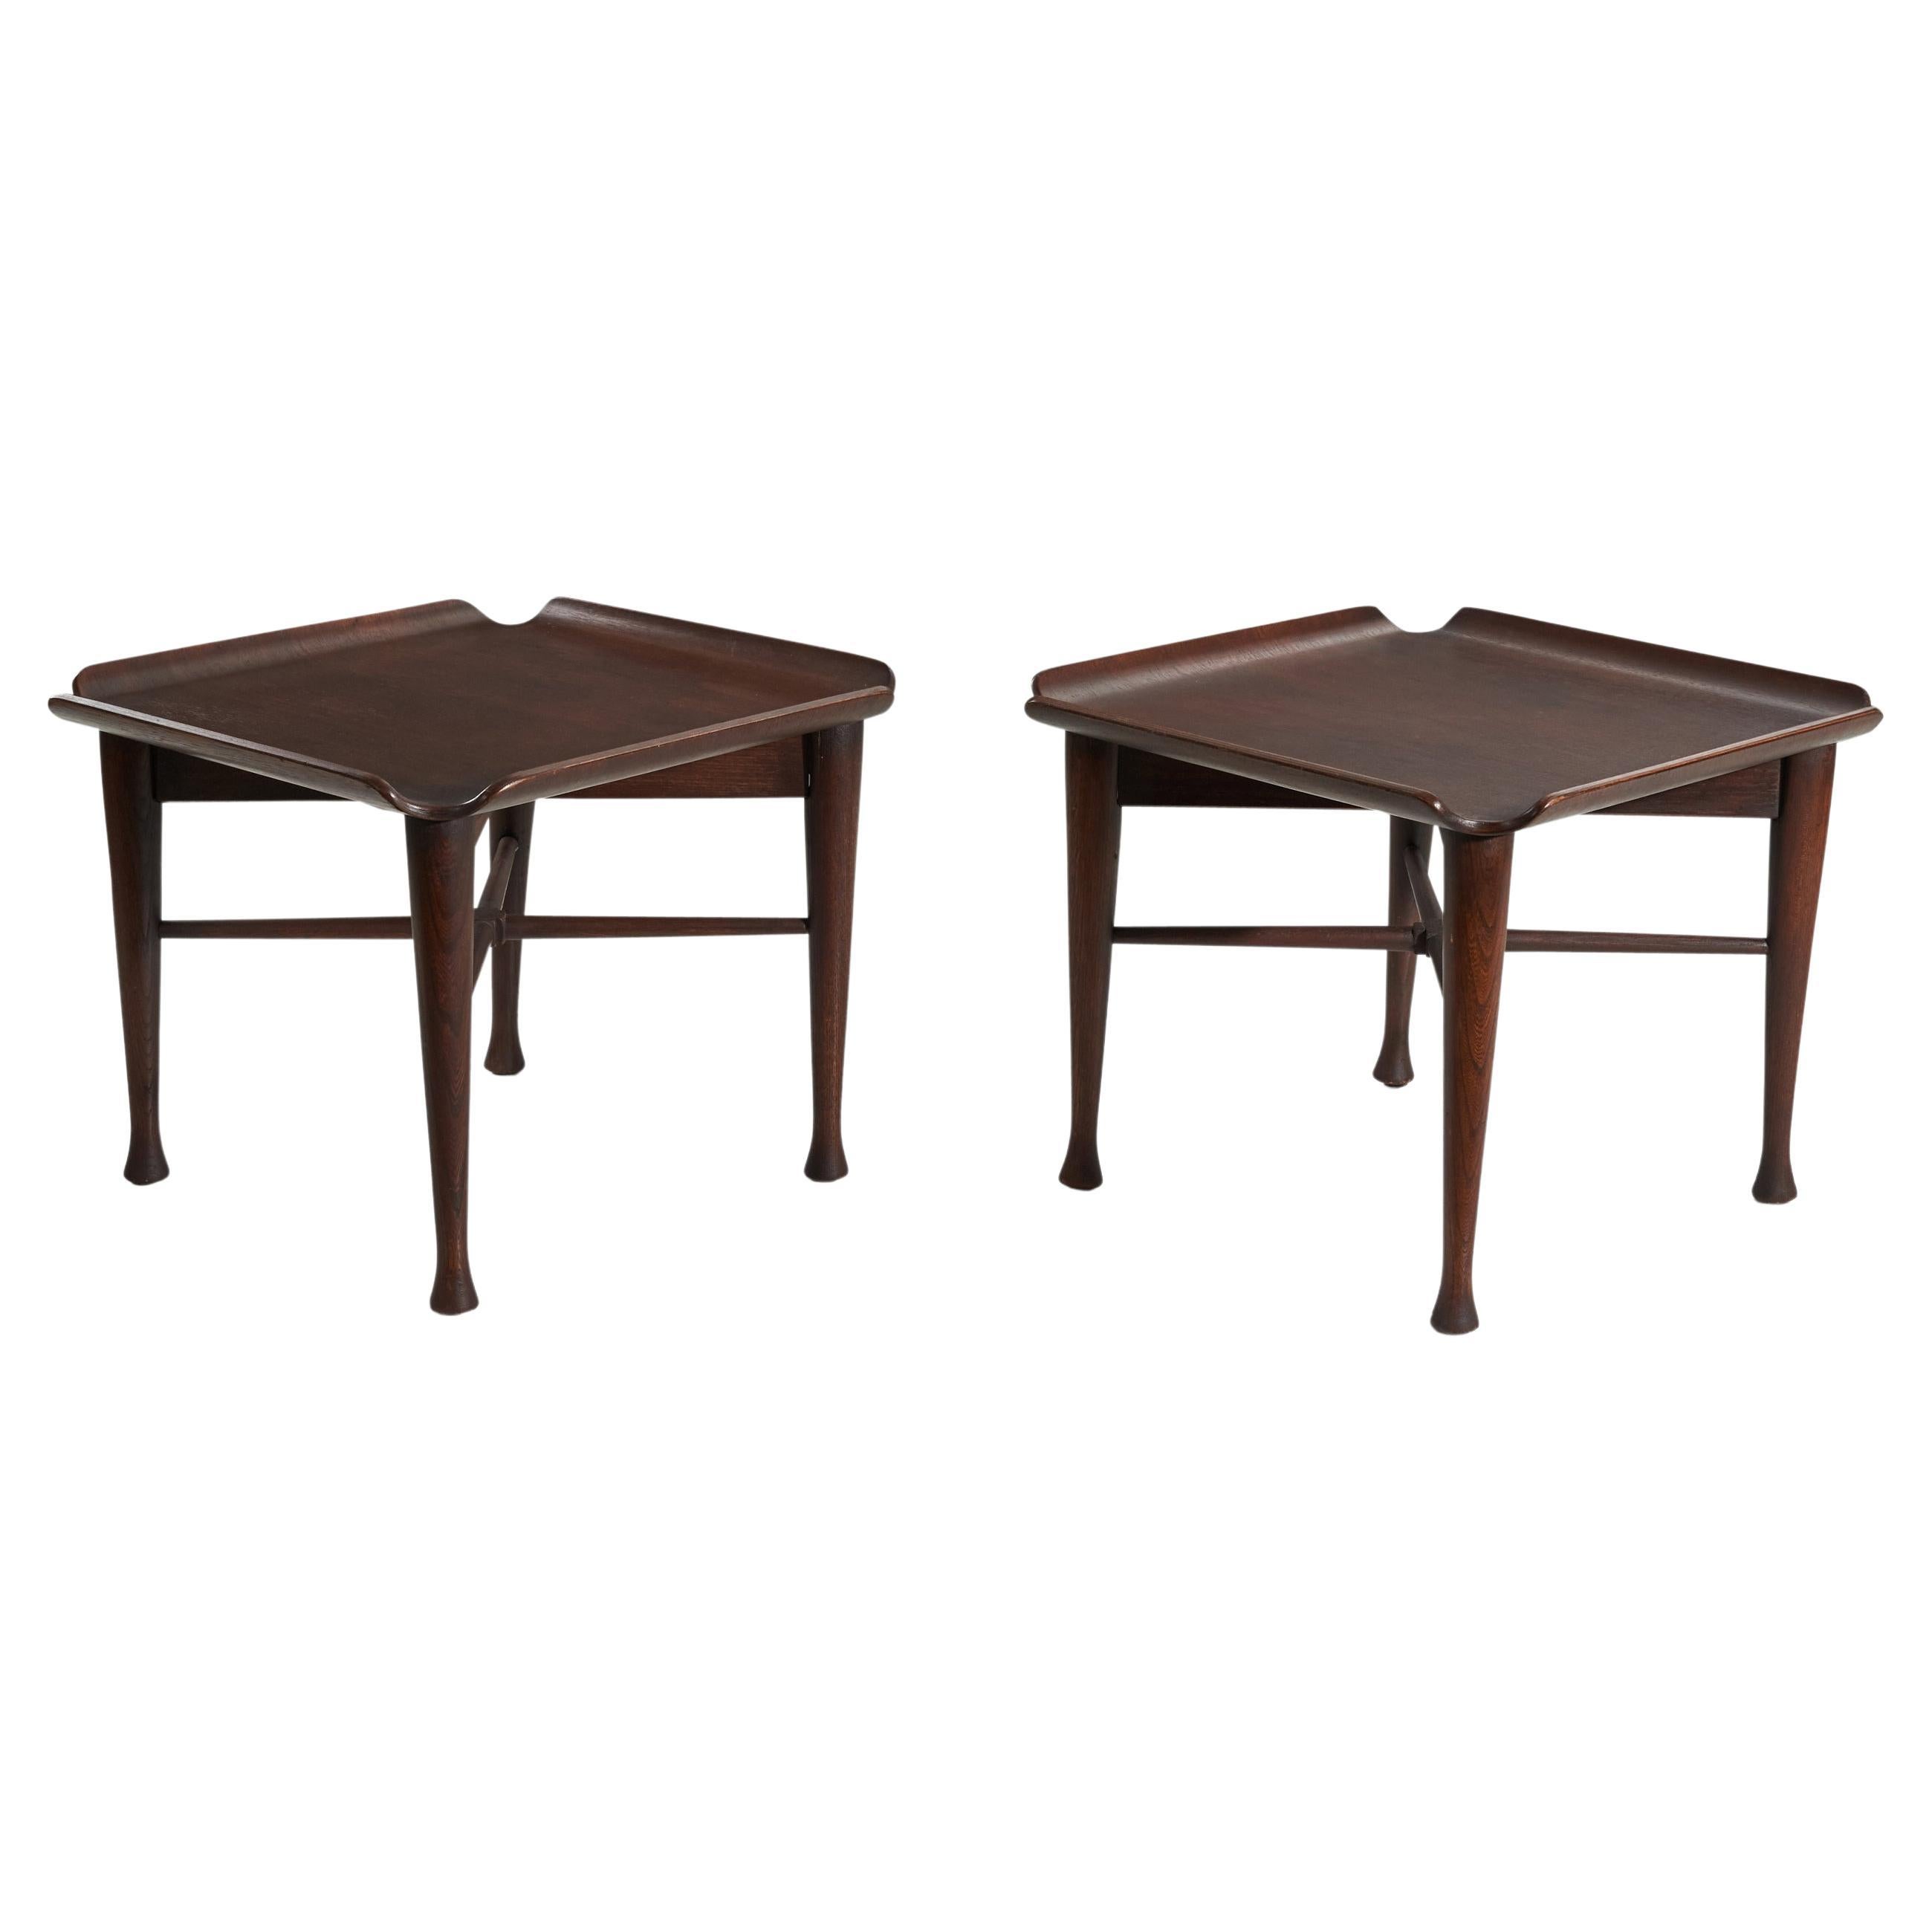 Lawrence Peabody, Pair of Side Tables or End Tables, Walnut, United States 1960s